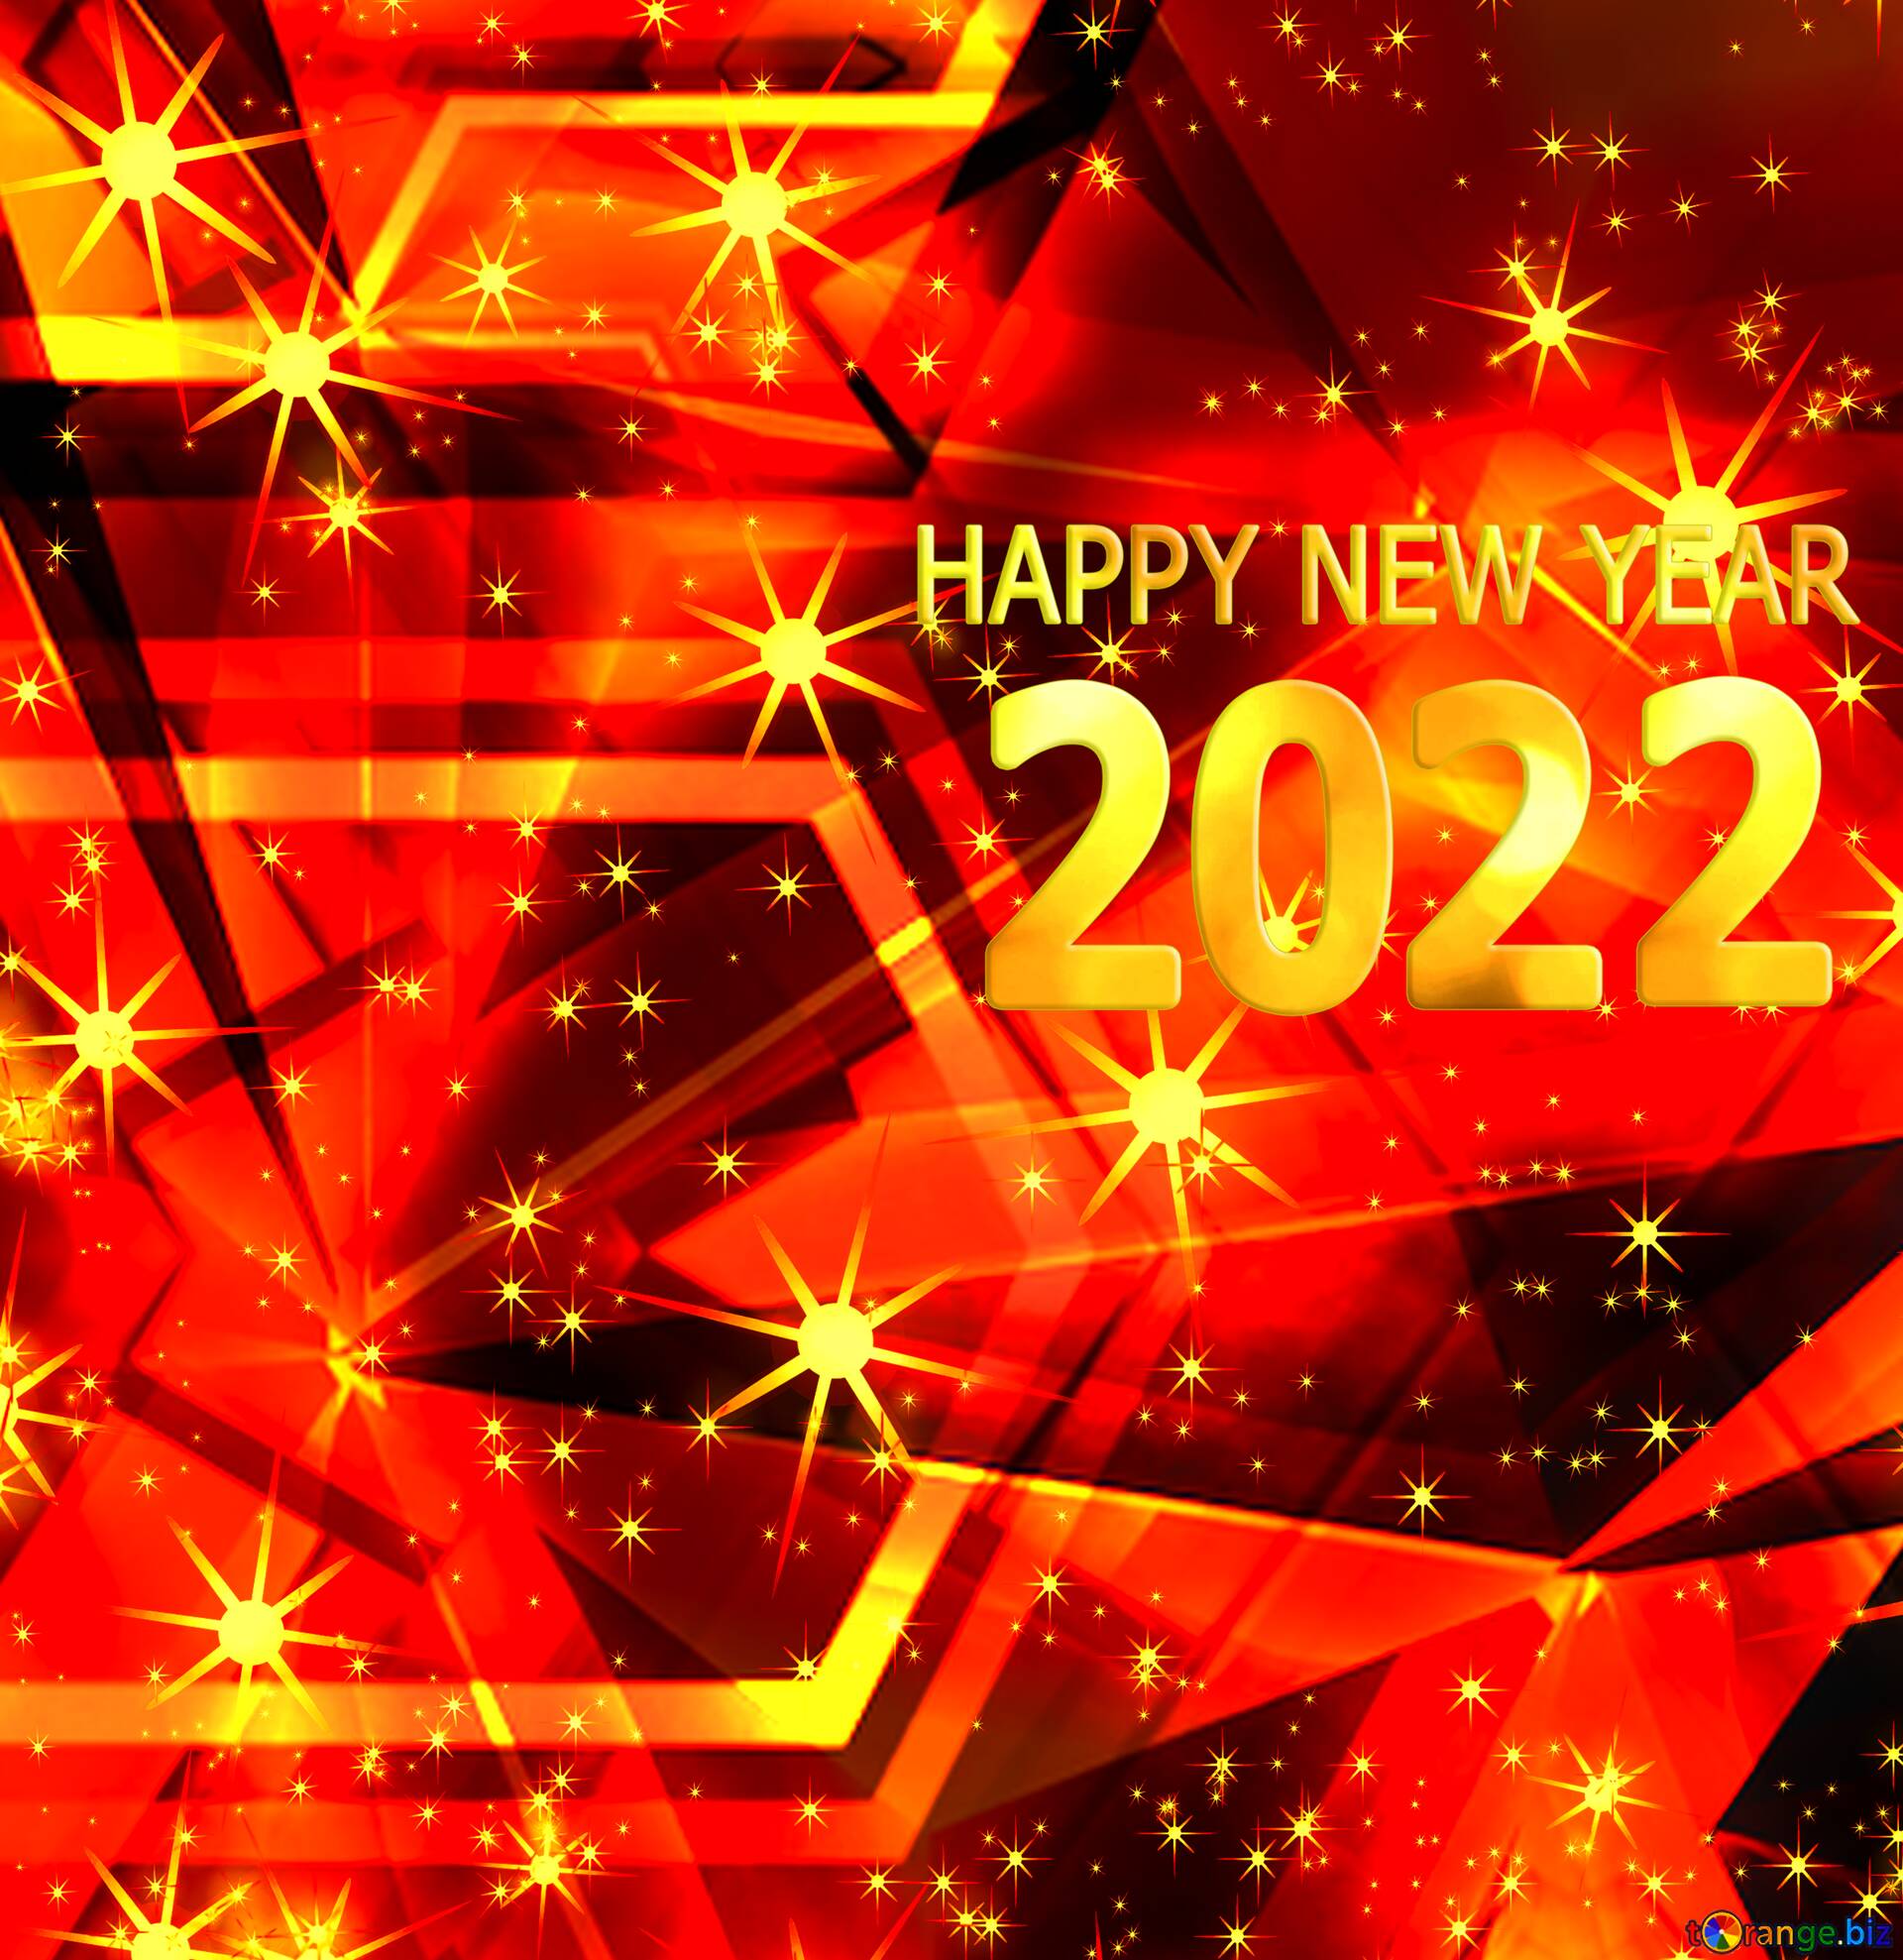 Happy New Year 2022 3D Red Tech Background On CC BY License Free Image Stock TOrange.biz Fx №229109